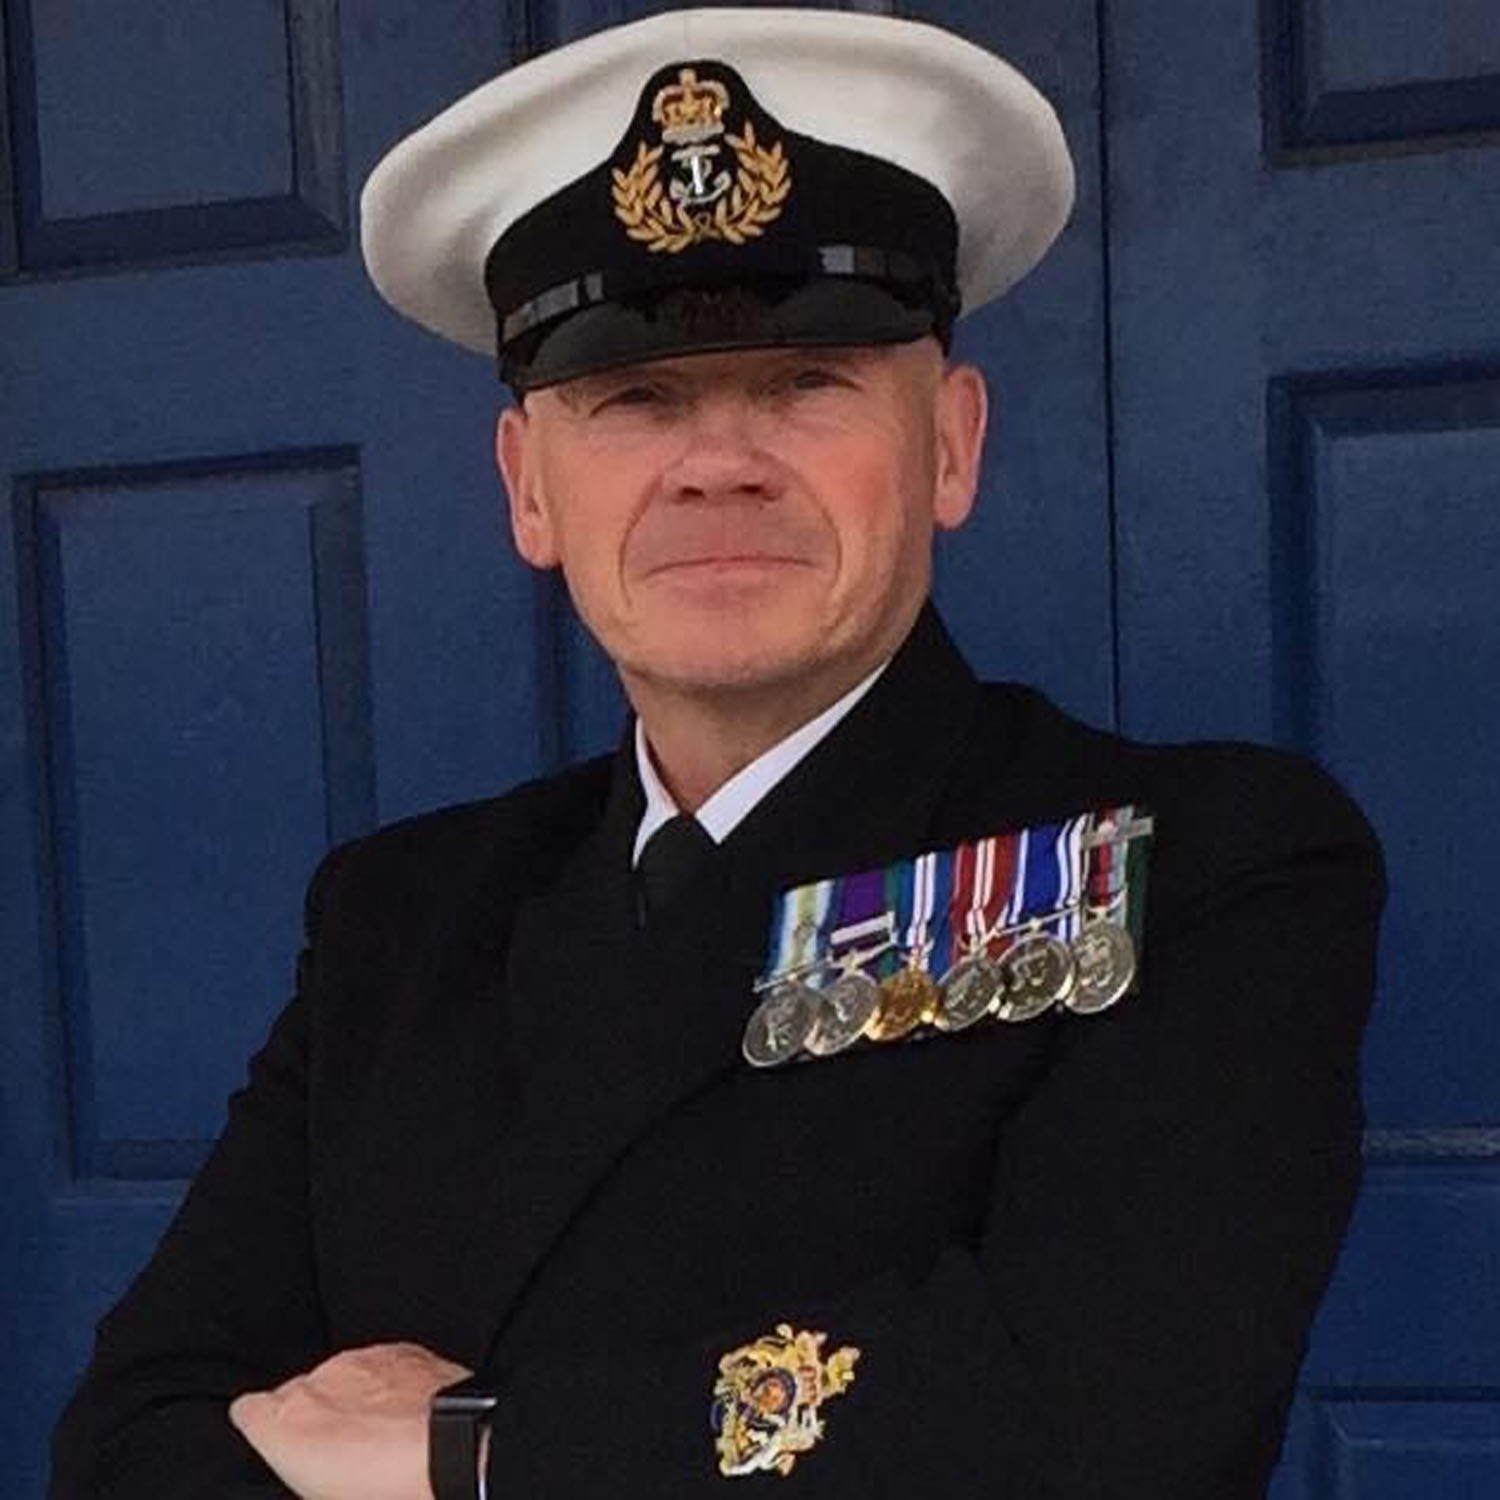 HMS Forward officer retires after over 30 years